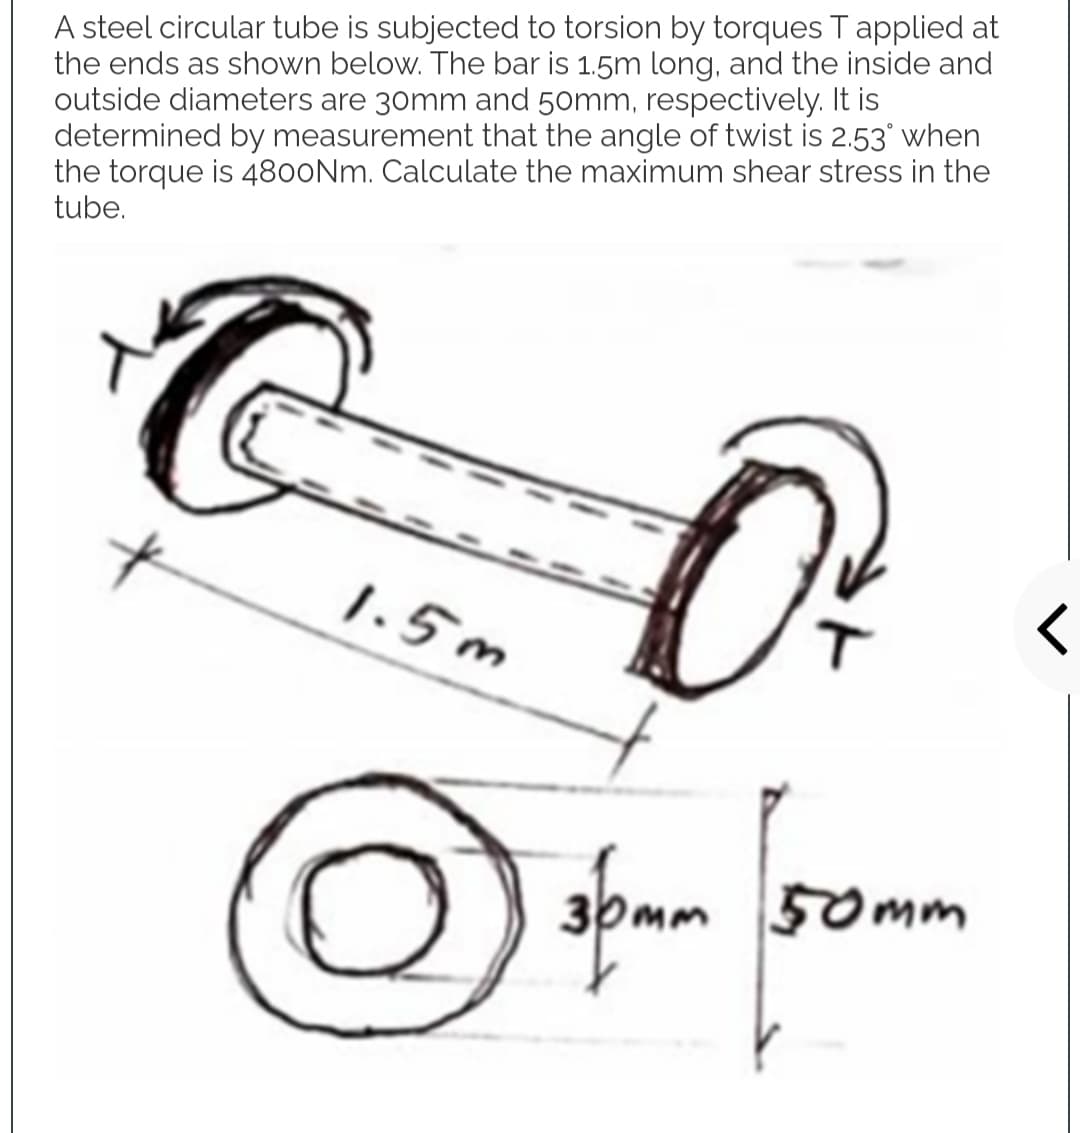 A steel circular tube is subjected to torsion by torques T applied at
the ends as shown below. The bar is 1.5m long, and the inside and
outside diameters are 30mm and 50mm, respectively. It is
determined by measurement that the angle of twist is 2.53° when
the torque is 4800Nm. Calculate the maximum shear stress in the
tube.
O
1.5m
3pmm 50mm
O
<